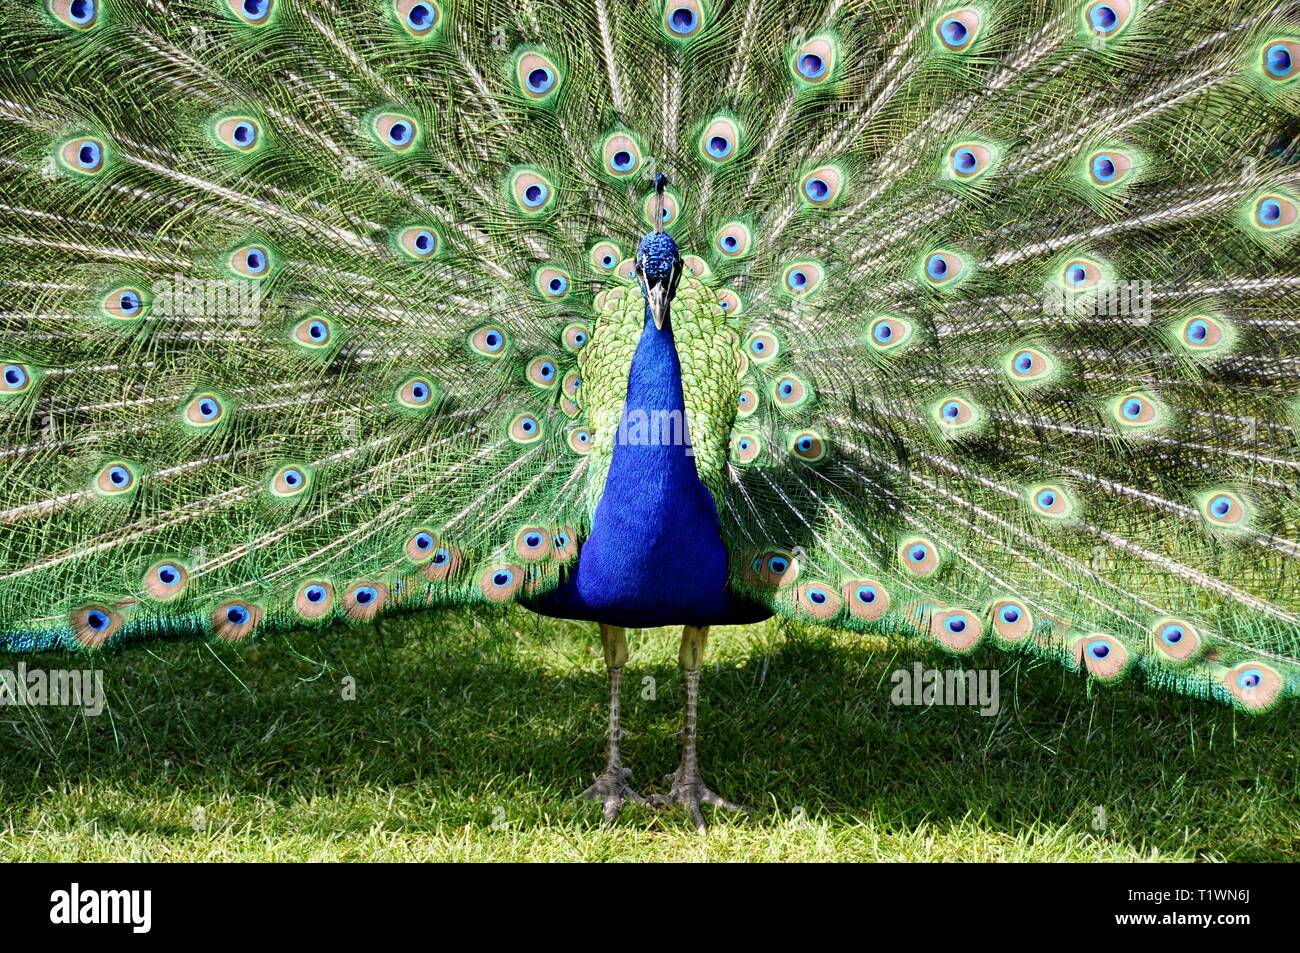 Peacock spreading and displaying his feathers Stock Photo